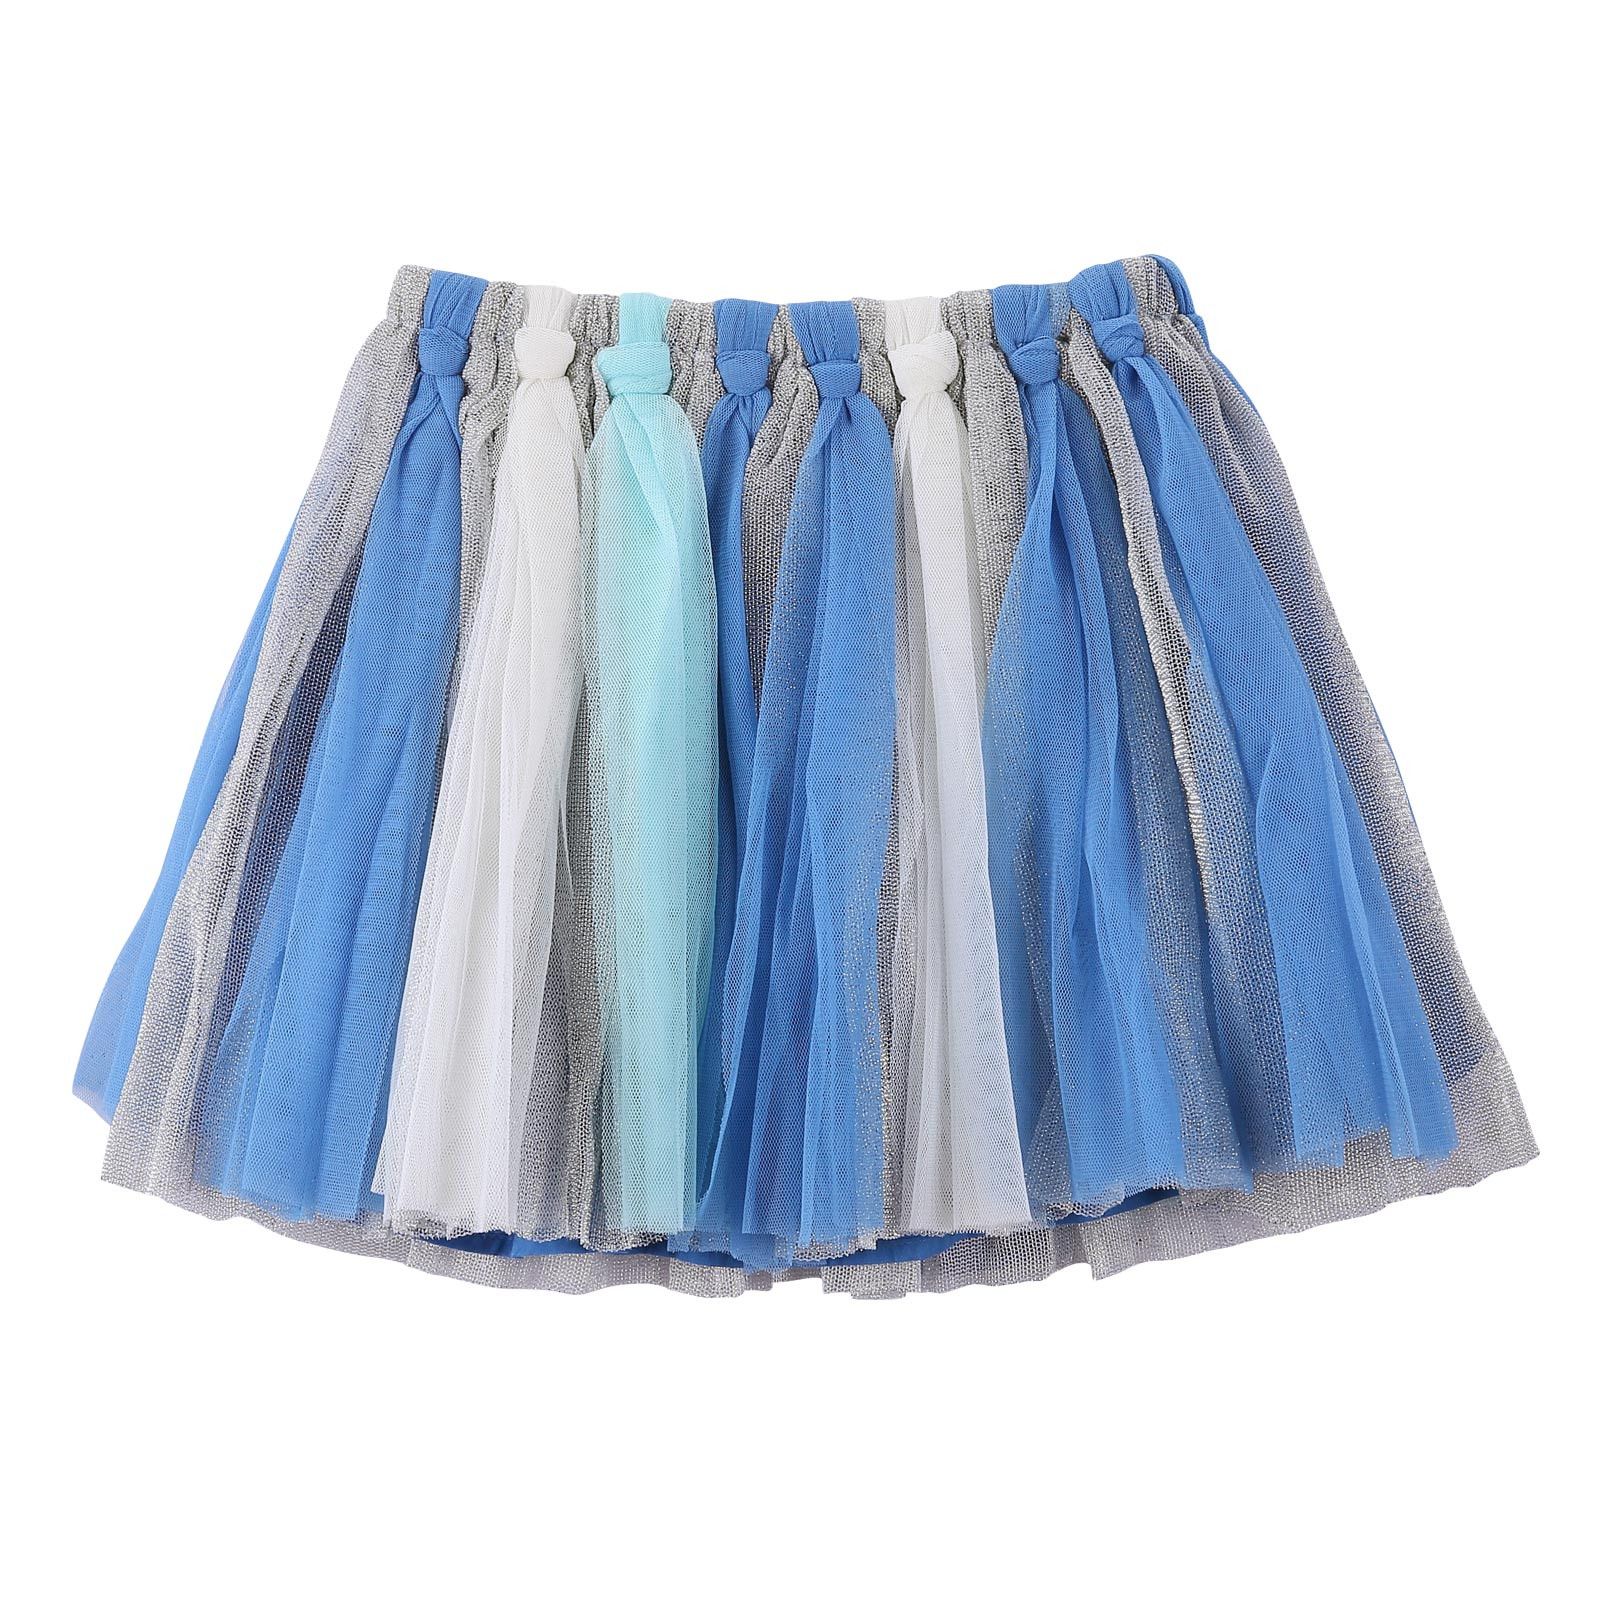 Girls Multicolor Marine Style Skirt With Patch Trims - CÉMAROSE | Children's Fashion Store - 2